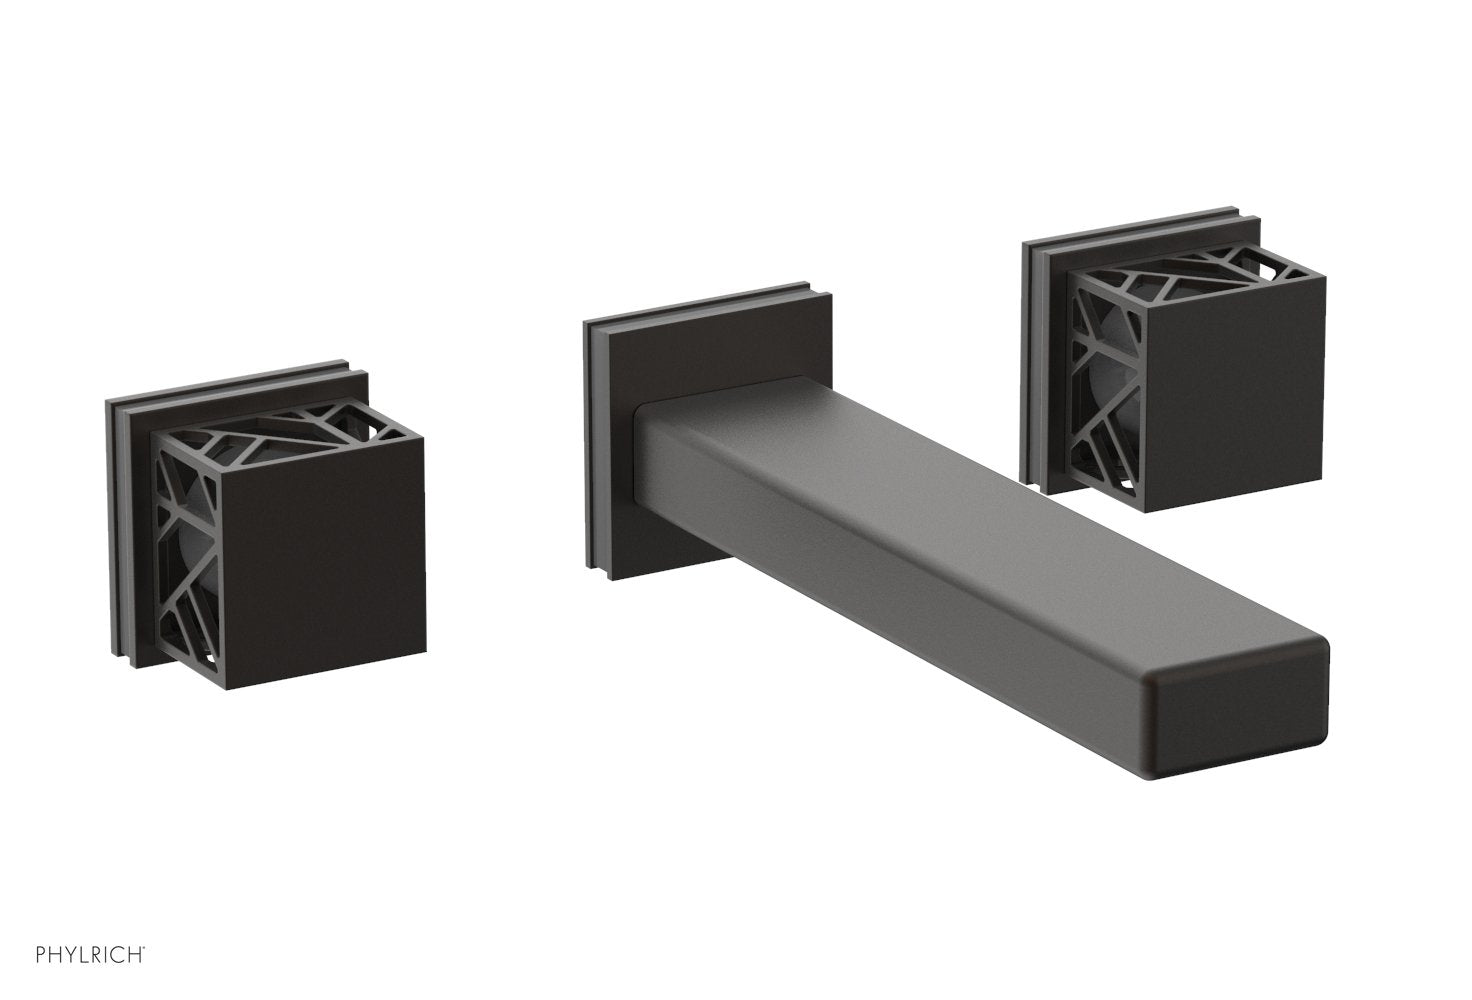 Phylrich JOLIE Wall Tub Set - Square Handles with "Grey" Accents